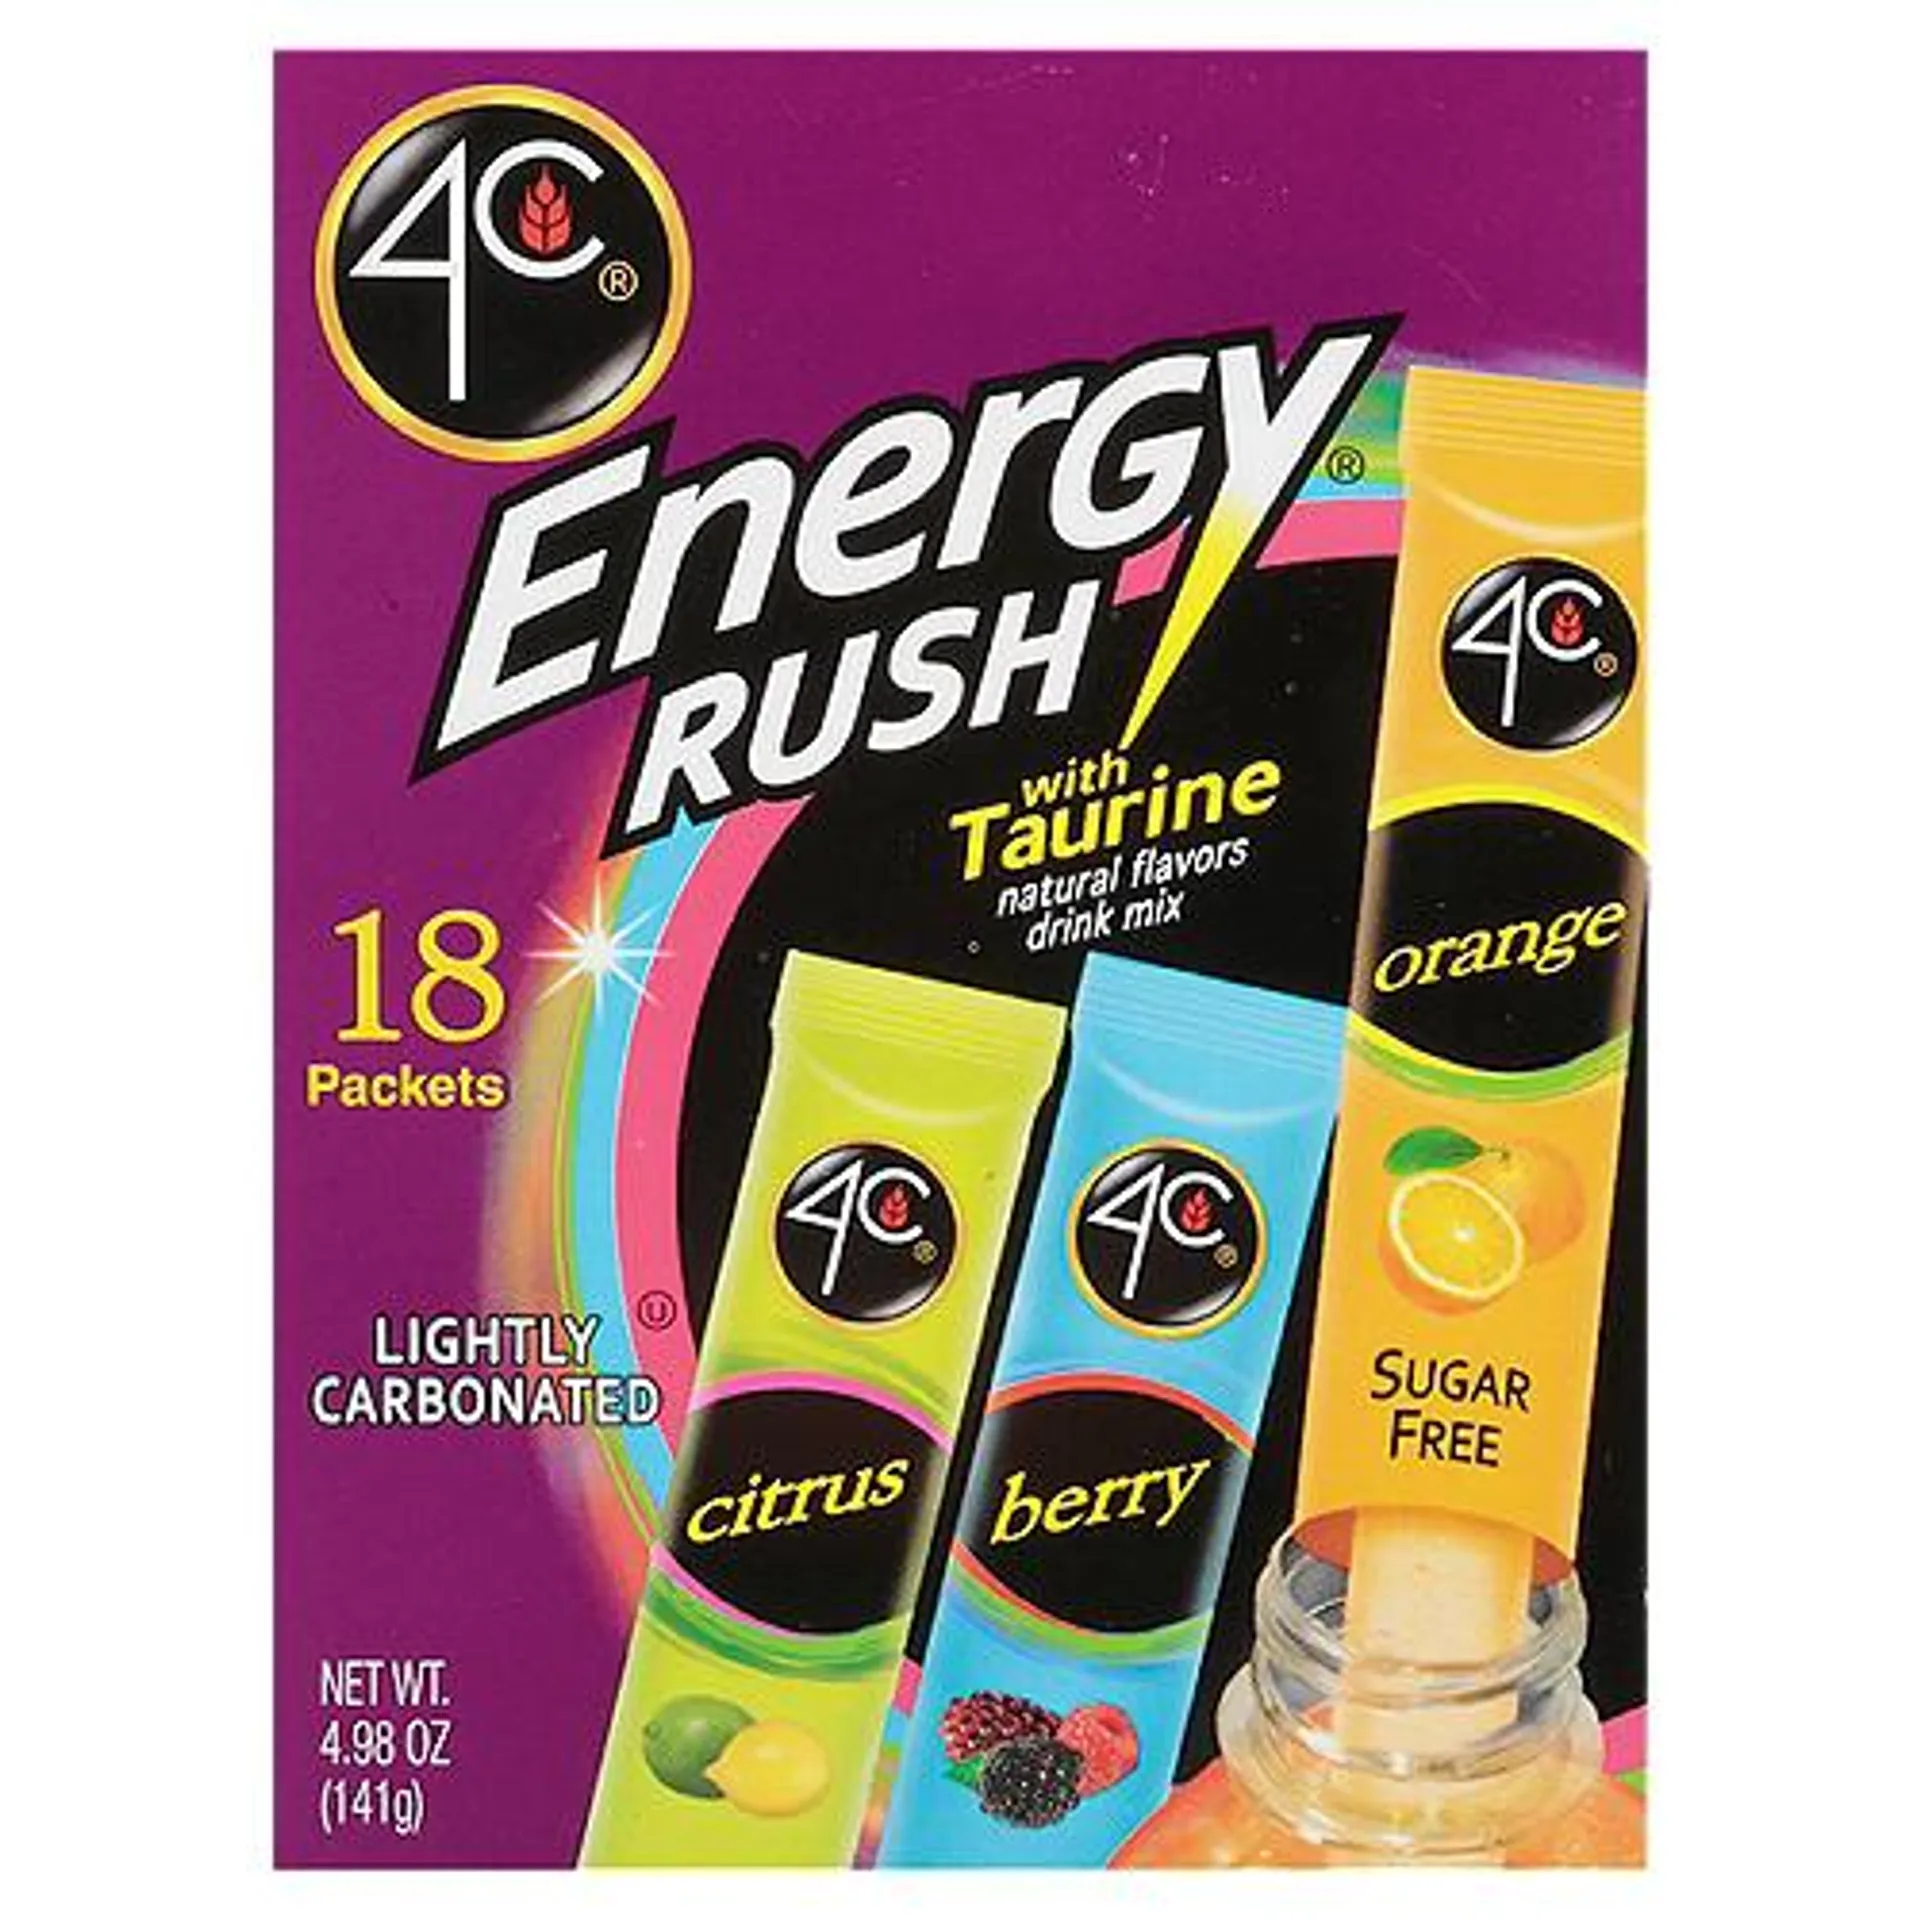 4C Sugar Free Energy Rush with Taurine, Drink Mix, 4.98 Ounce